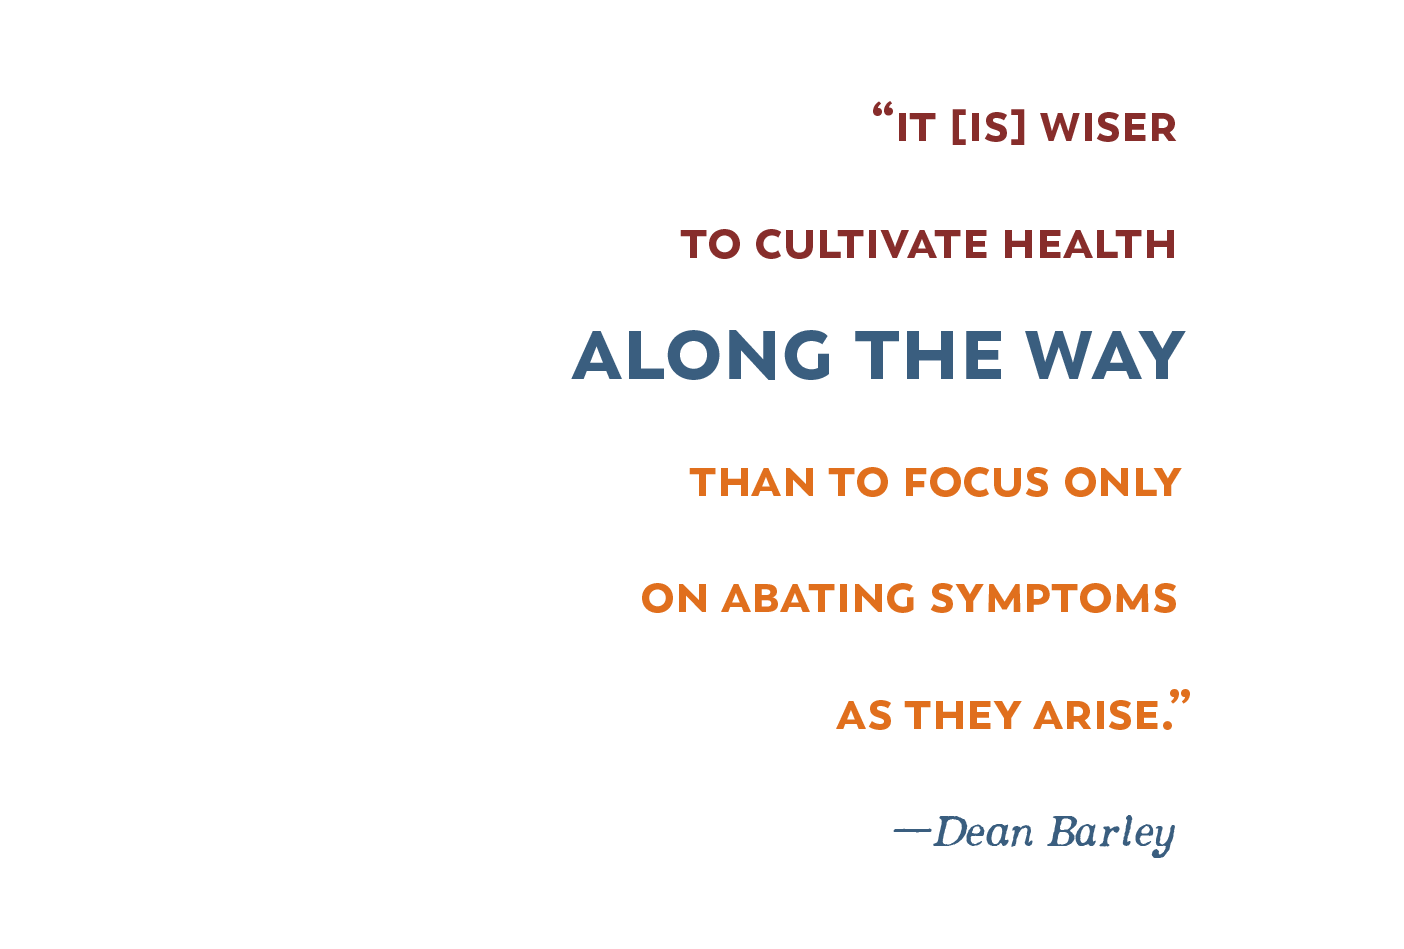 Pull Quote: "It [is] wiser to cultivate health along the way than to focus only on abating symptoms as they arise."